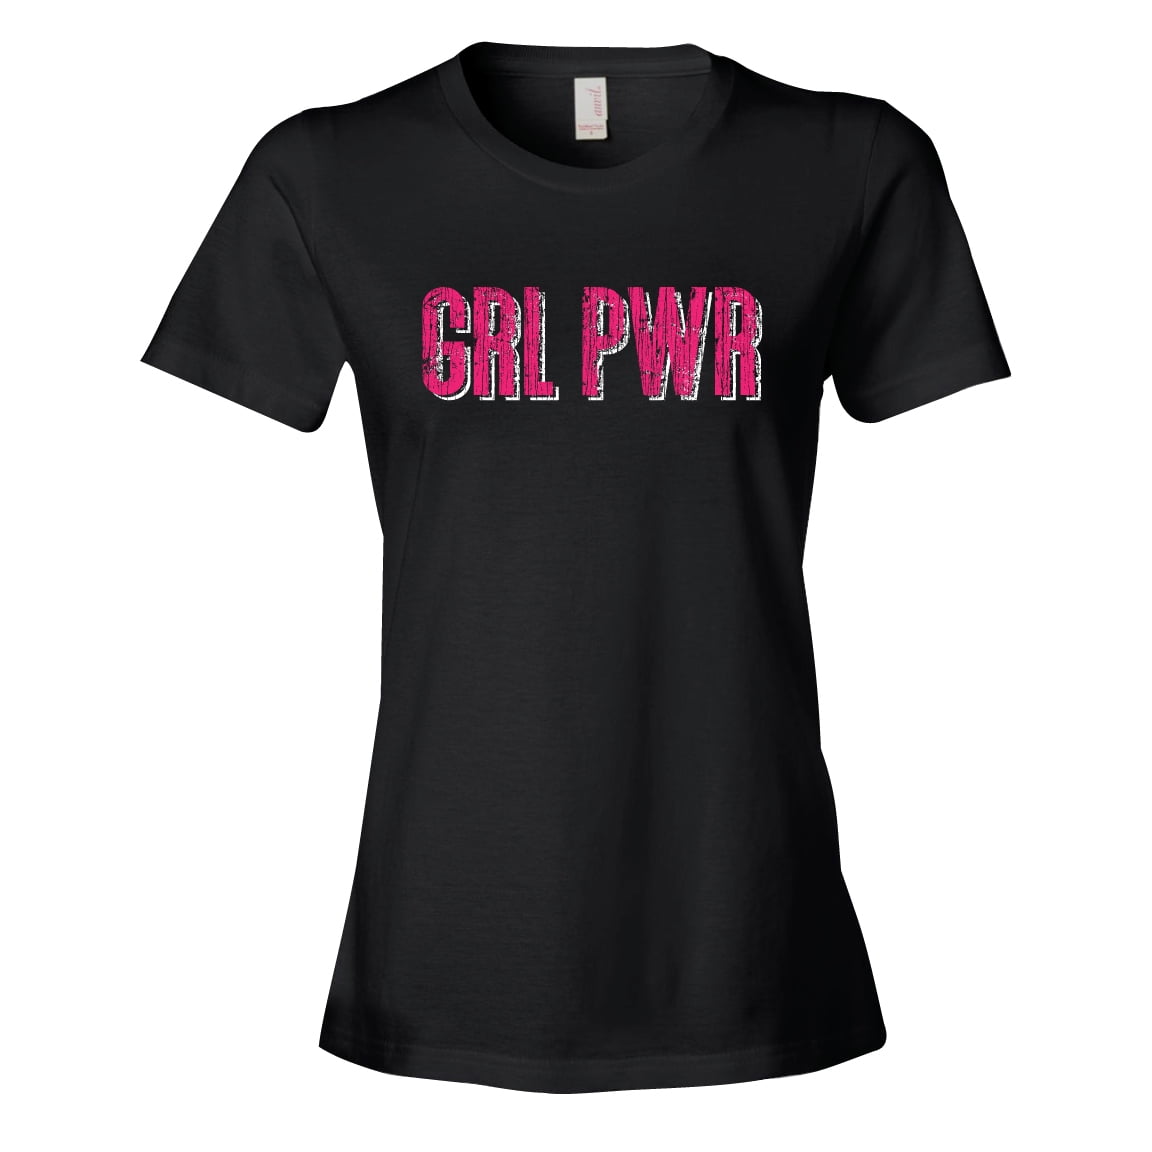 GRL PWR Funny Dad Joke Grilling BBQ Grill Power Pun Fathers Day Mens Womens Short-Sleeve Unisex T-Shirt